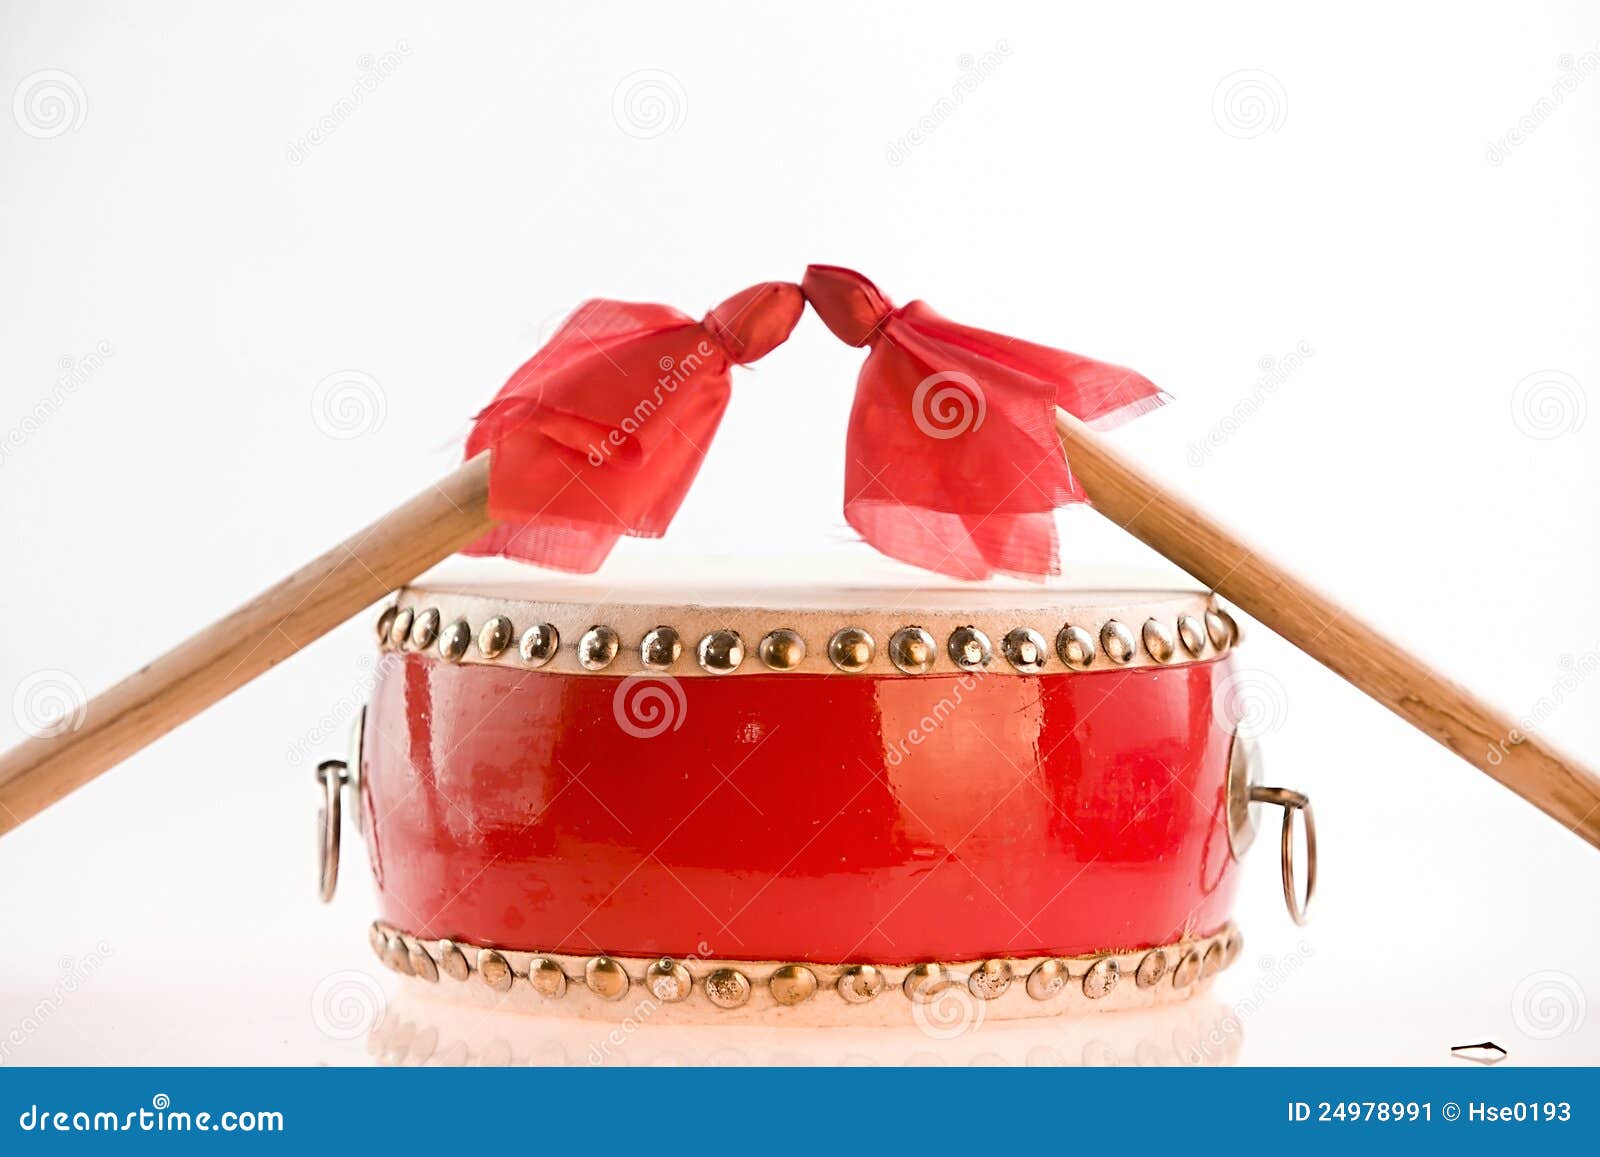 chinese drum and drumstick